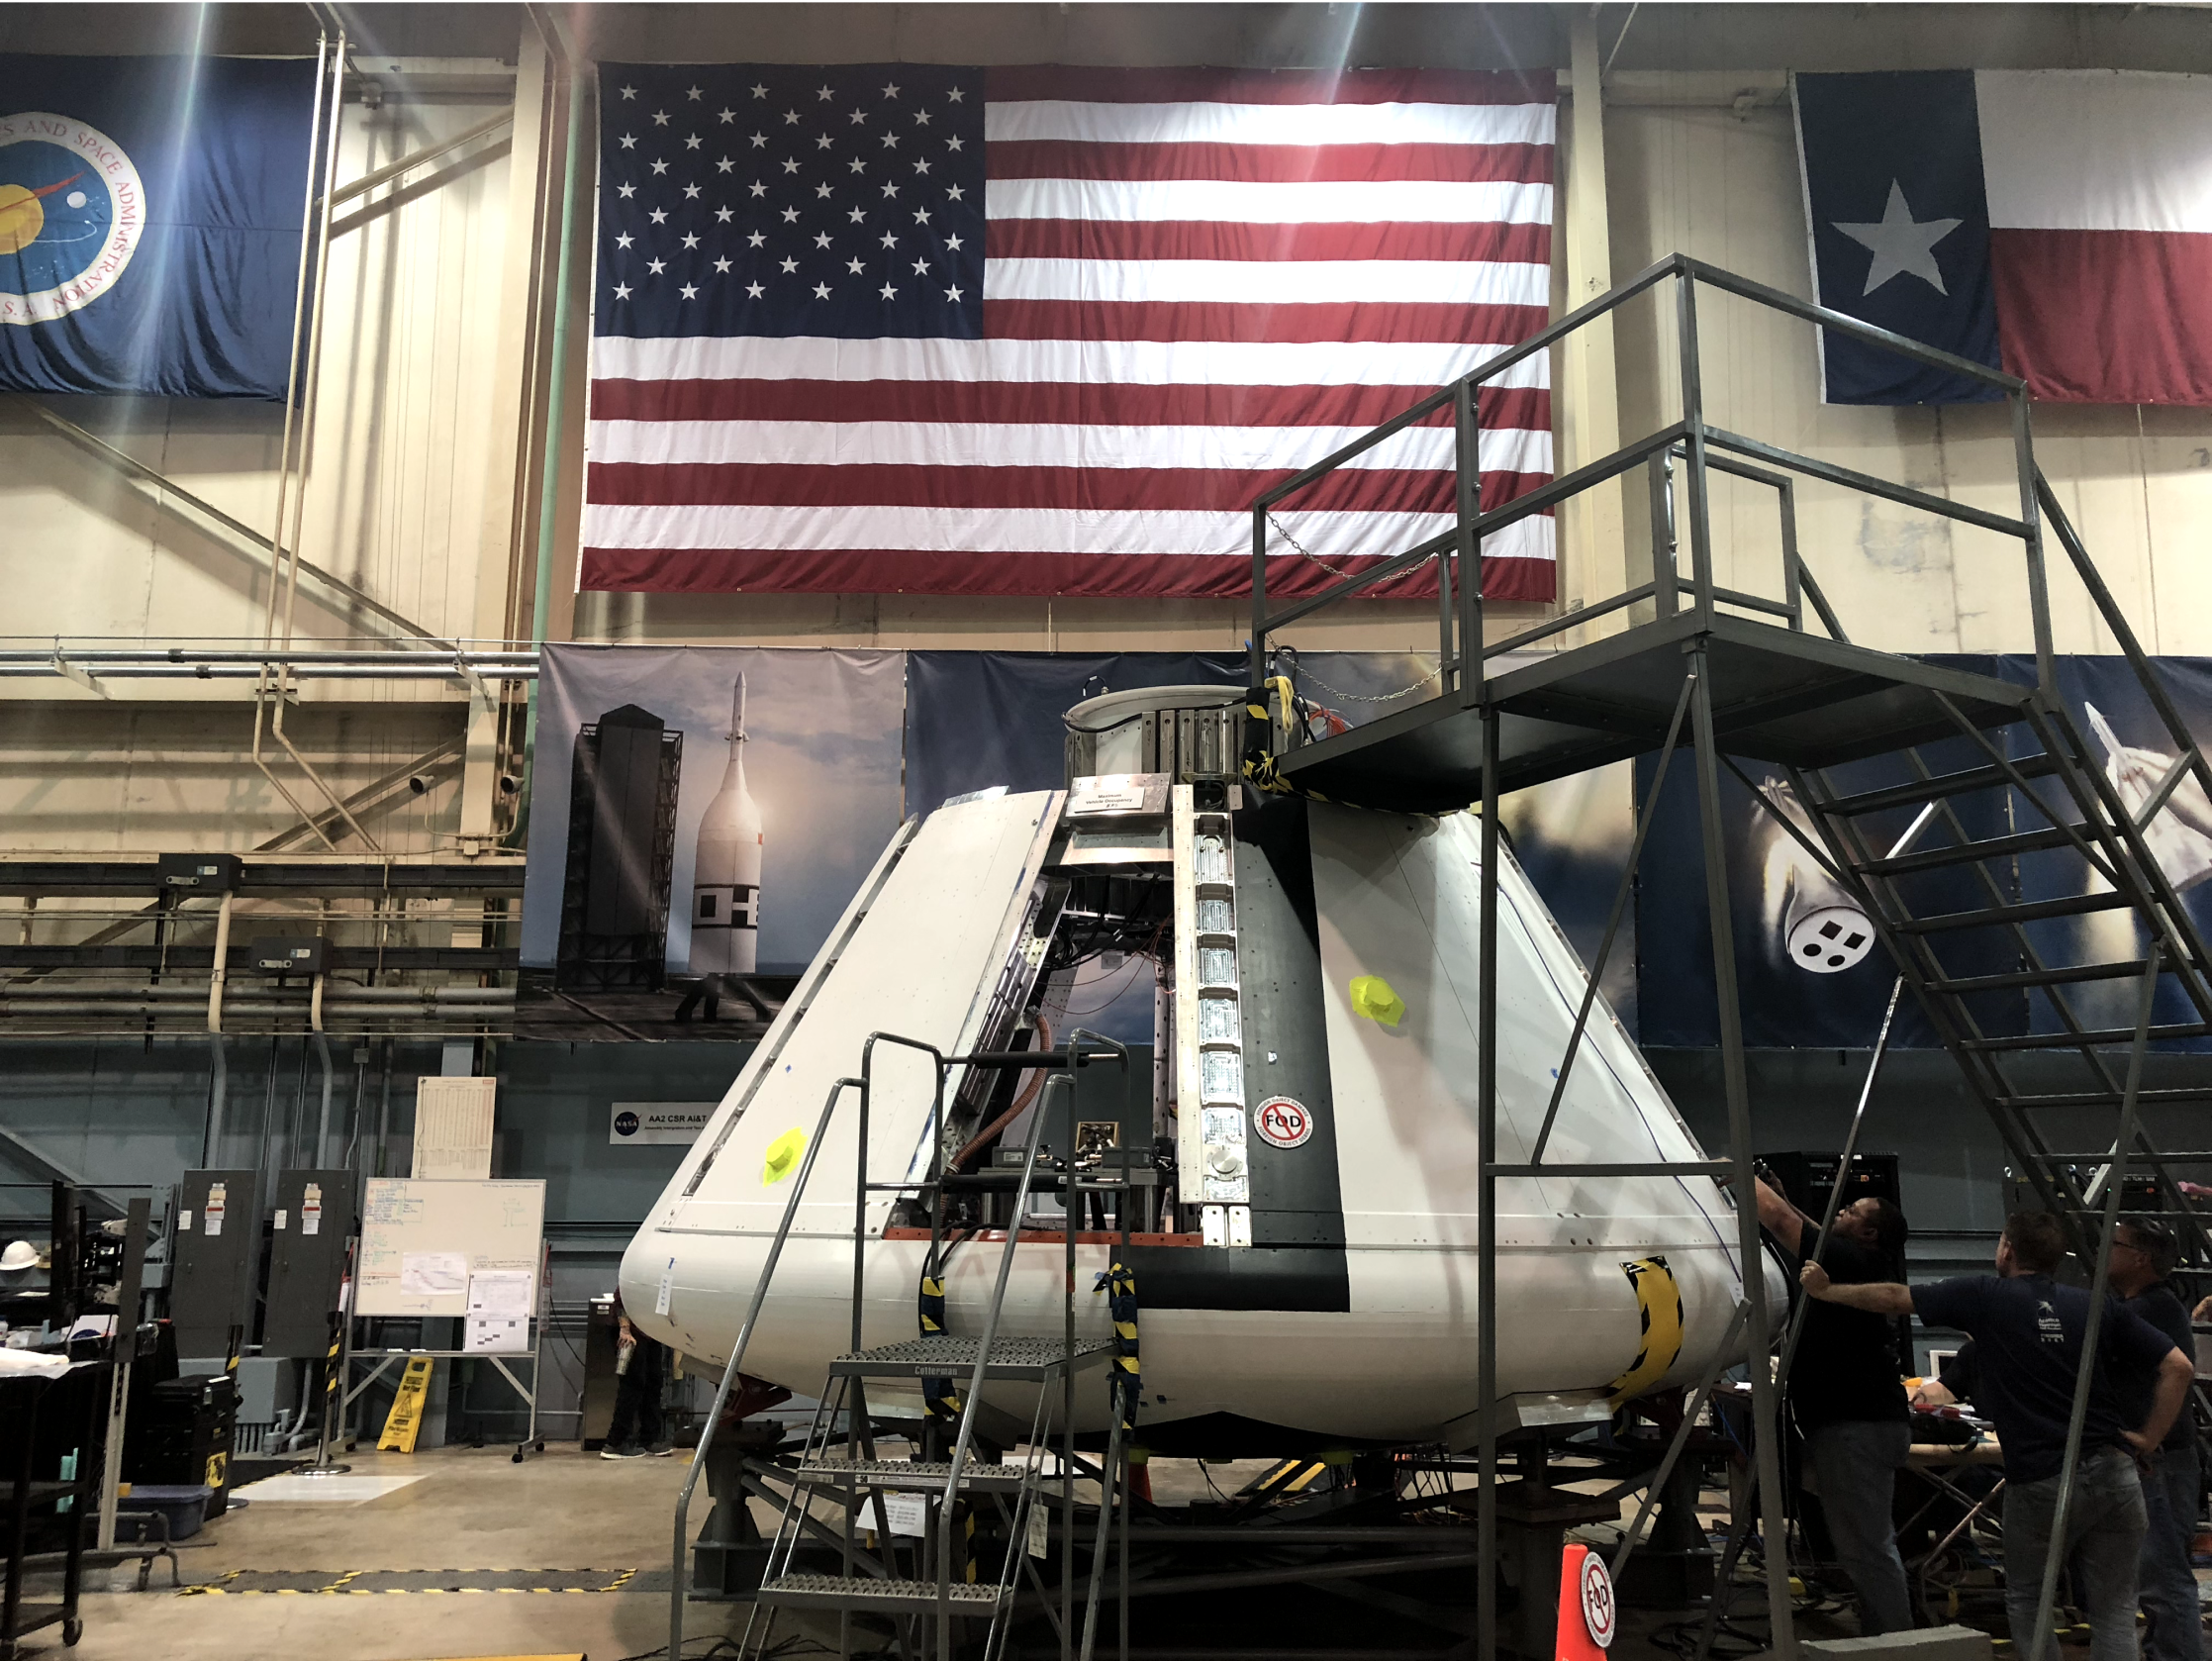 Orion Spacecraft, formerly referred to as Orion Multi-Purpose Crew Vehicle, is the partially reusable crewed spacecraft used in NASA's Artemis program. (Visit to Johnson Space Center, Houston, Texas)